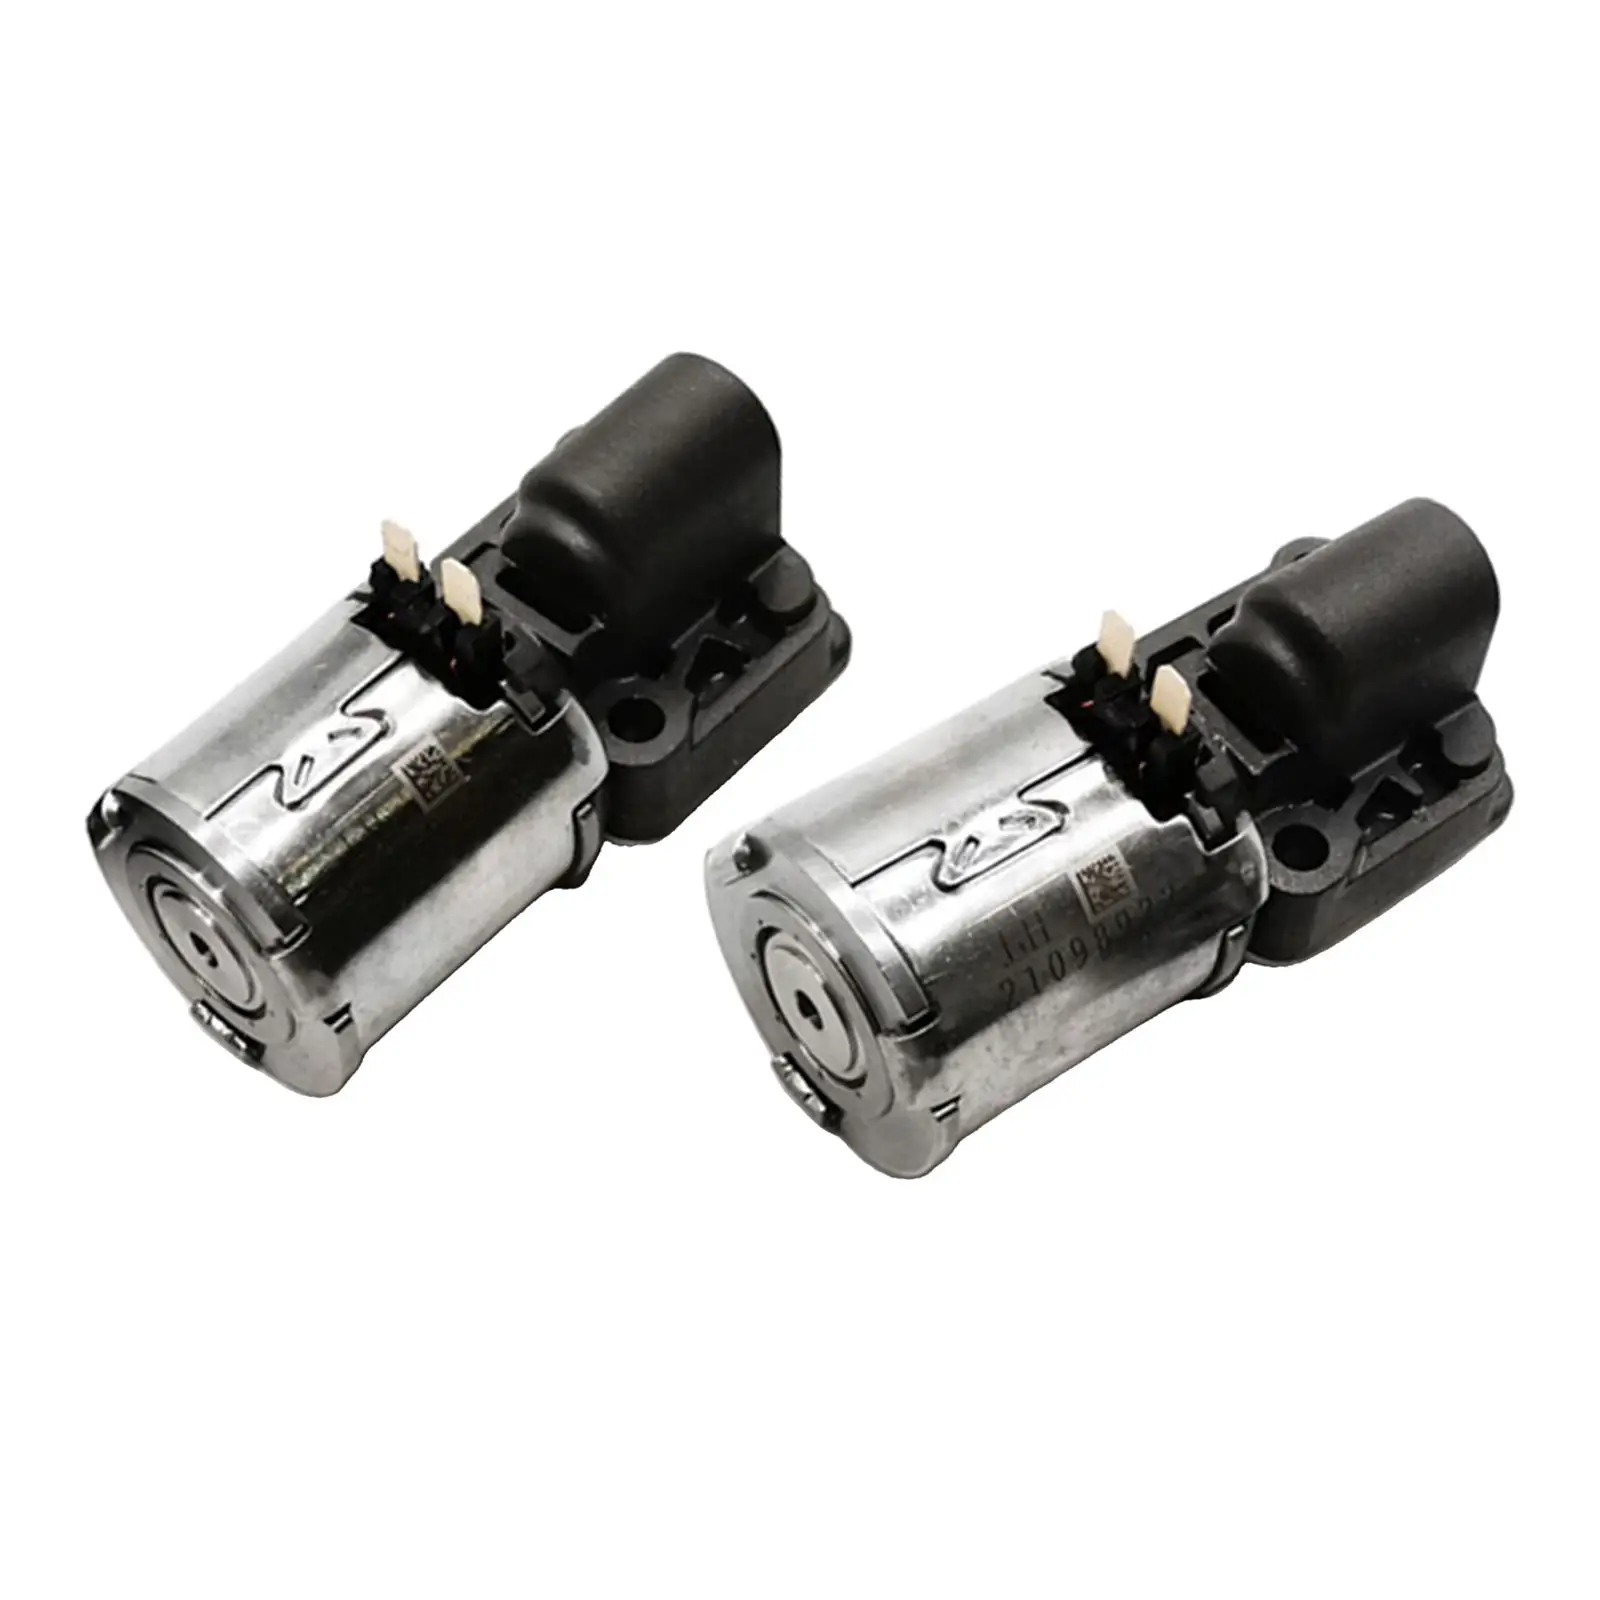 2x Auto Transmission Solenoid 0BH Dq500 Solenoid Valve for Audi A4 A5 A6 A7 Q5 2008-2011 for VW 7 Speed